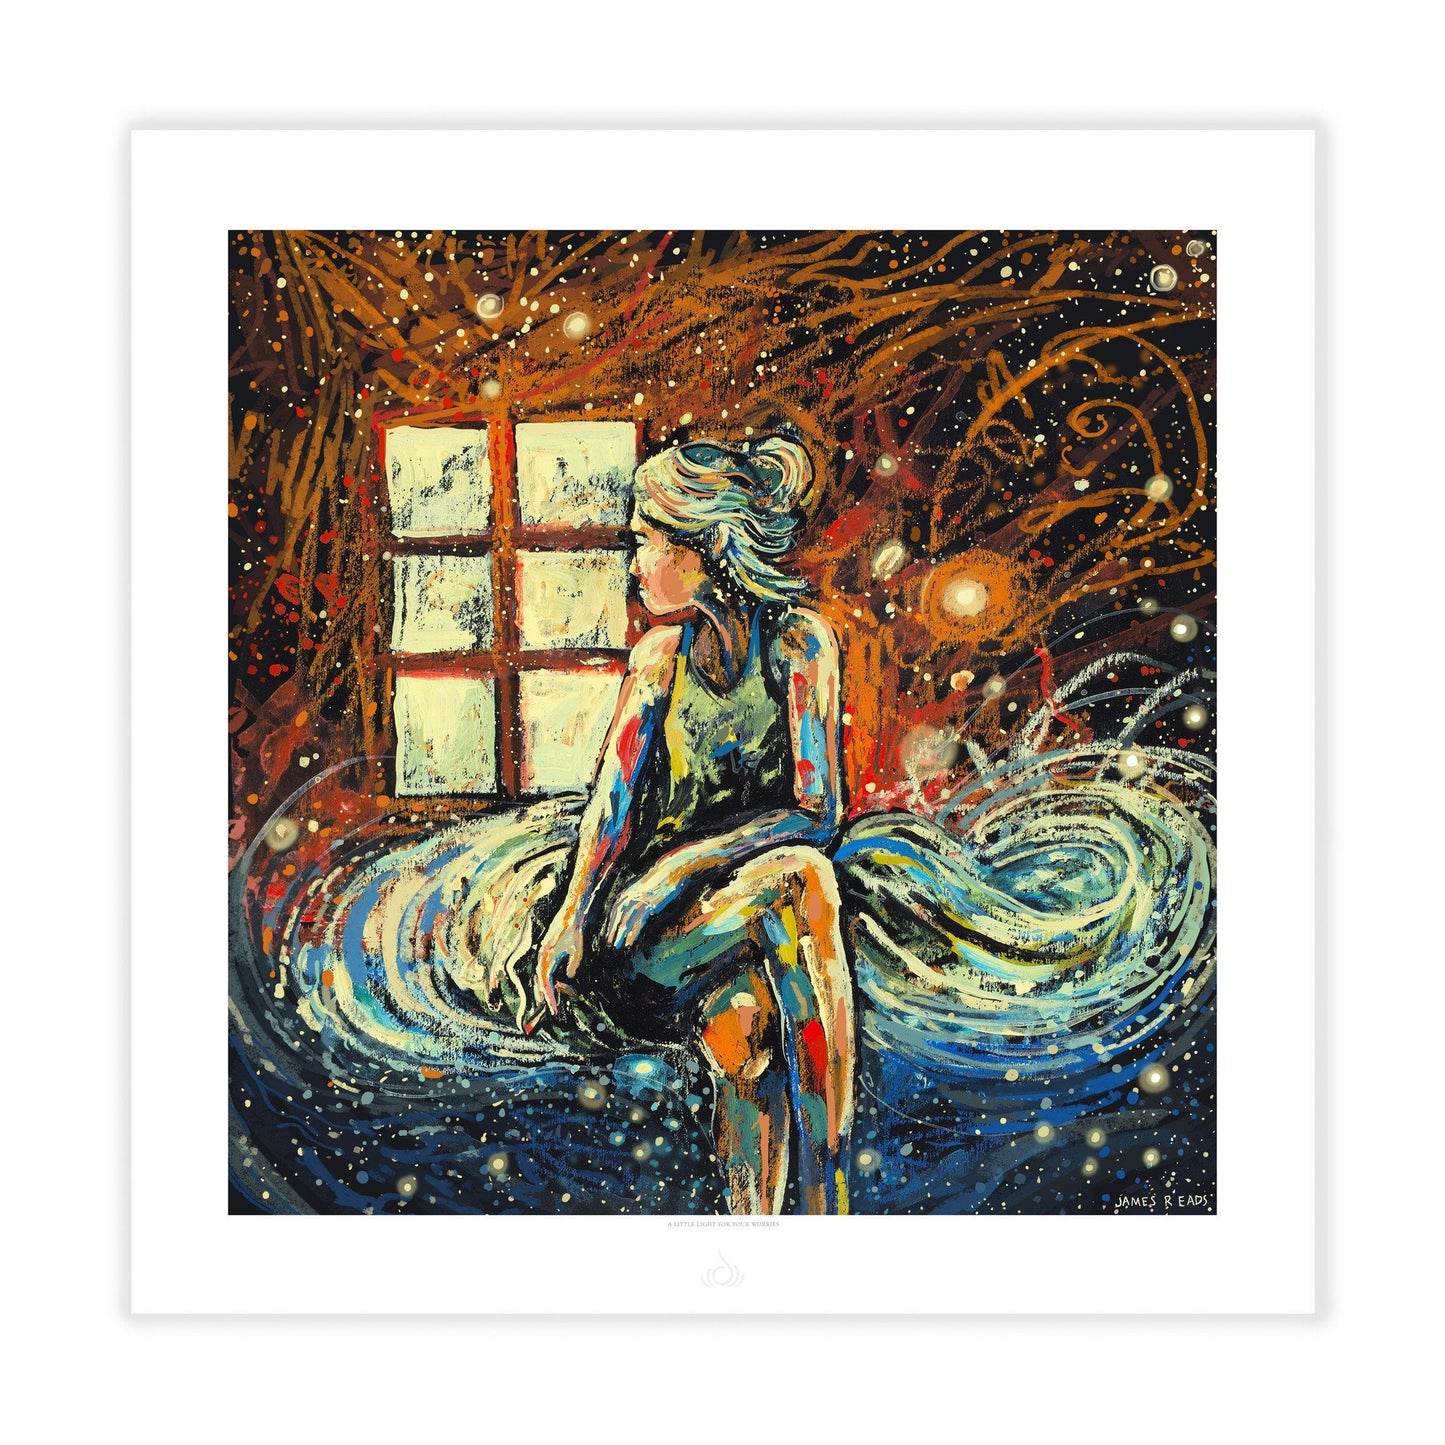 A Little Light For Your Worries (Limited Edition of 75) Print James R. Eads